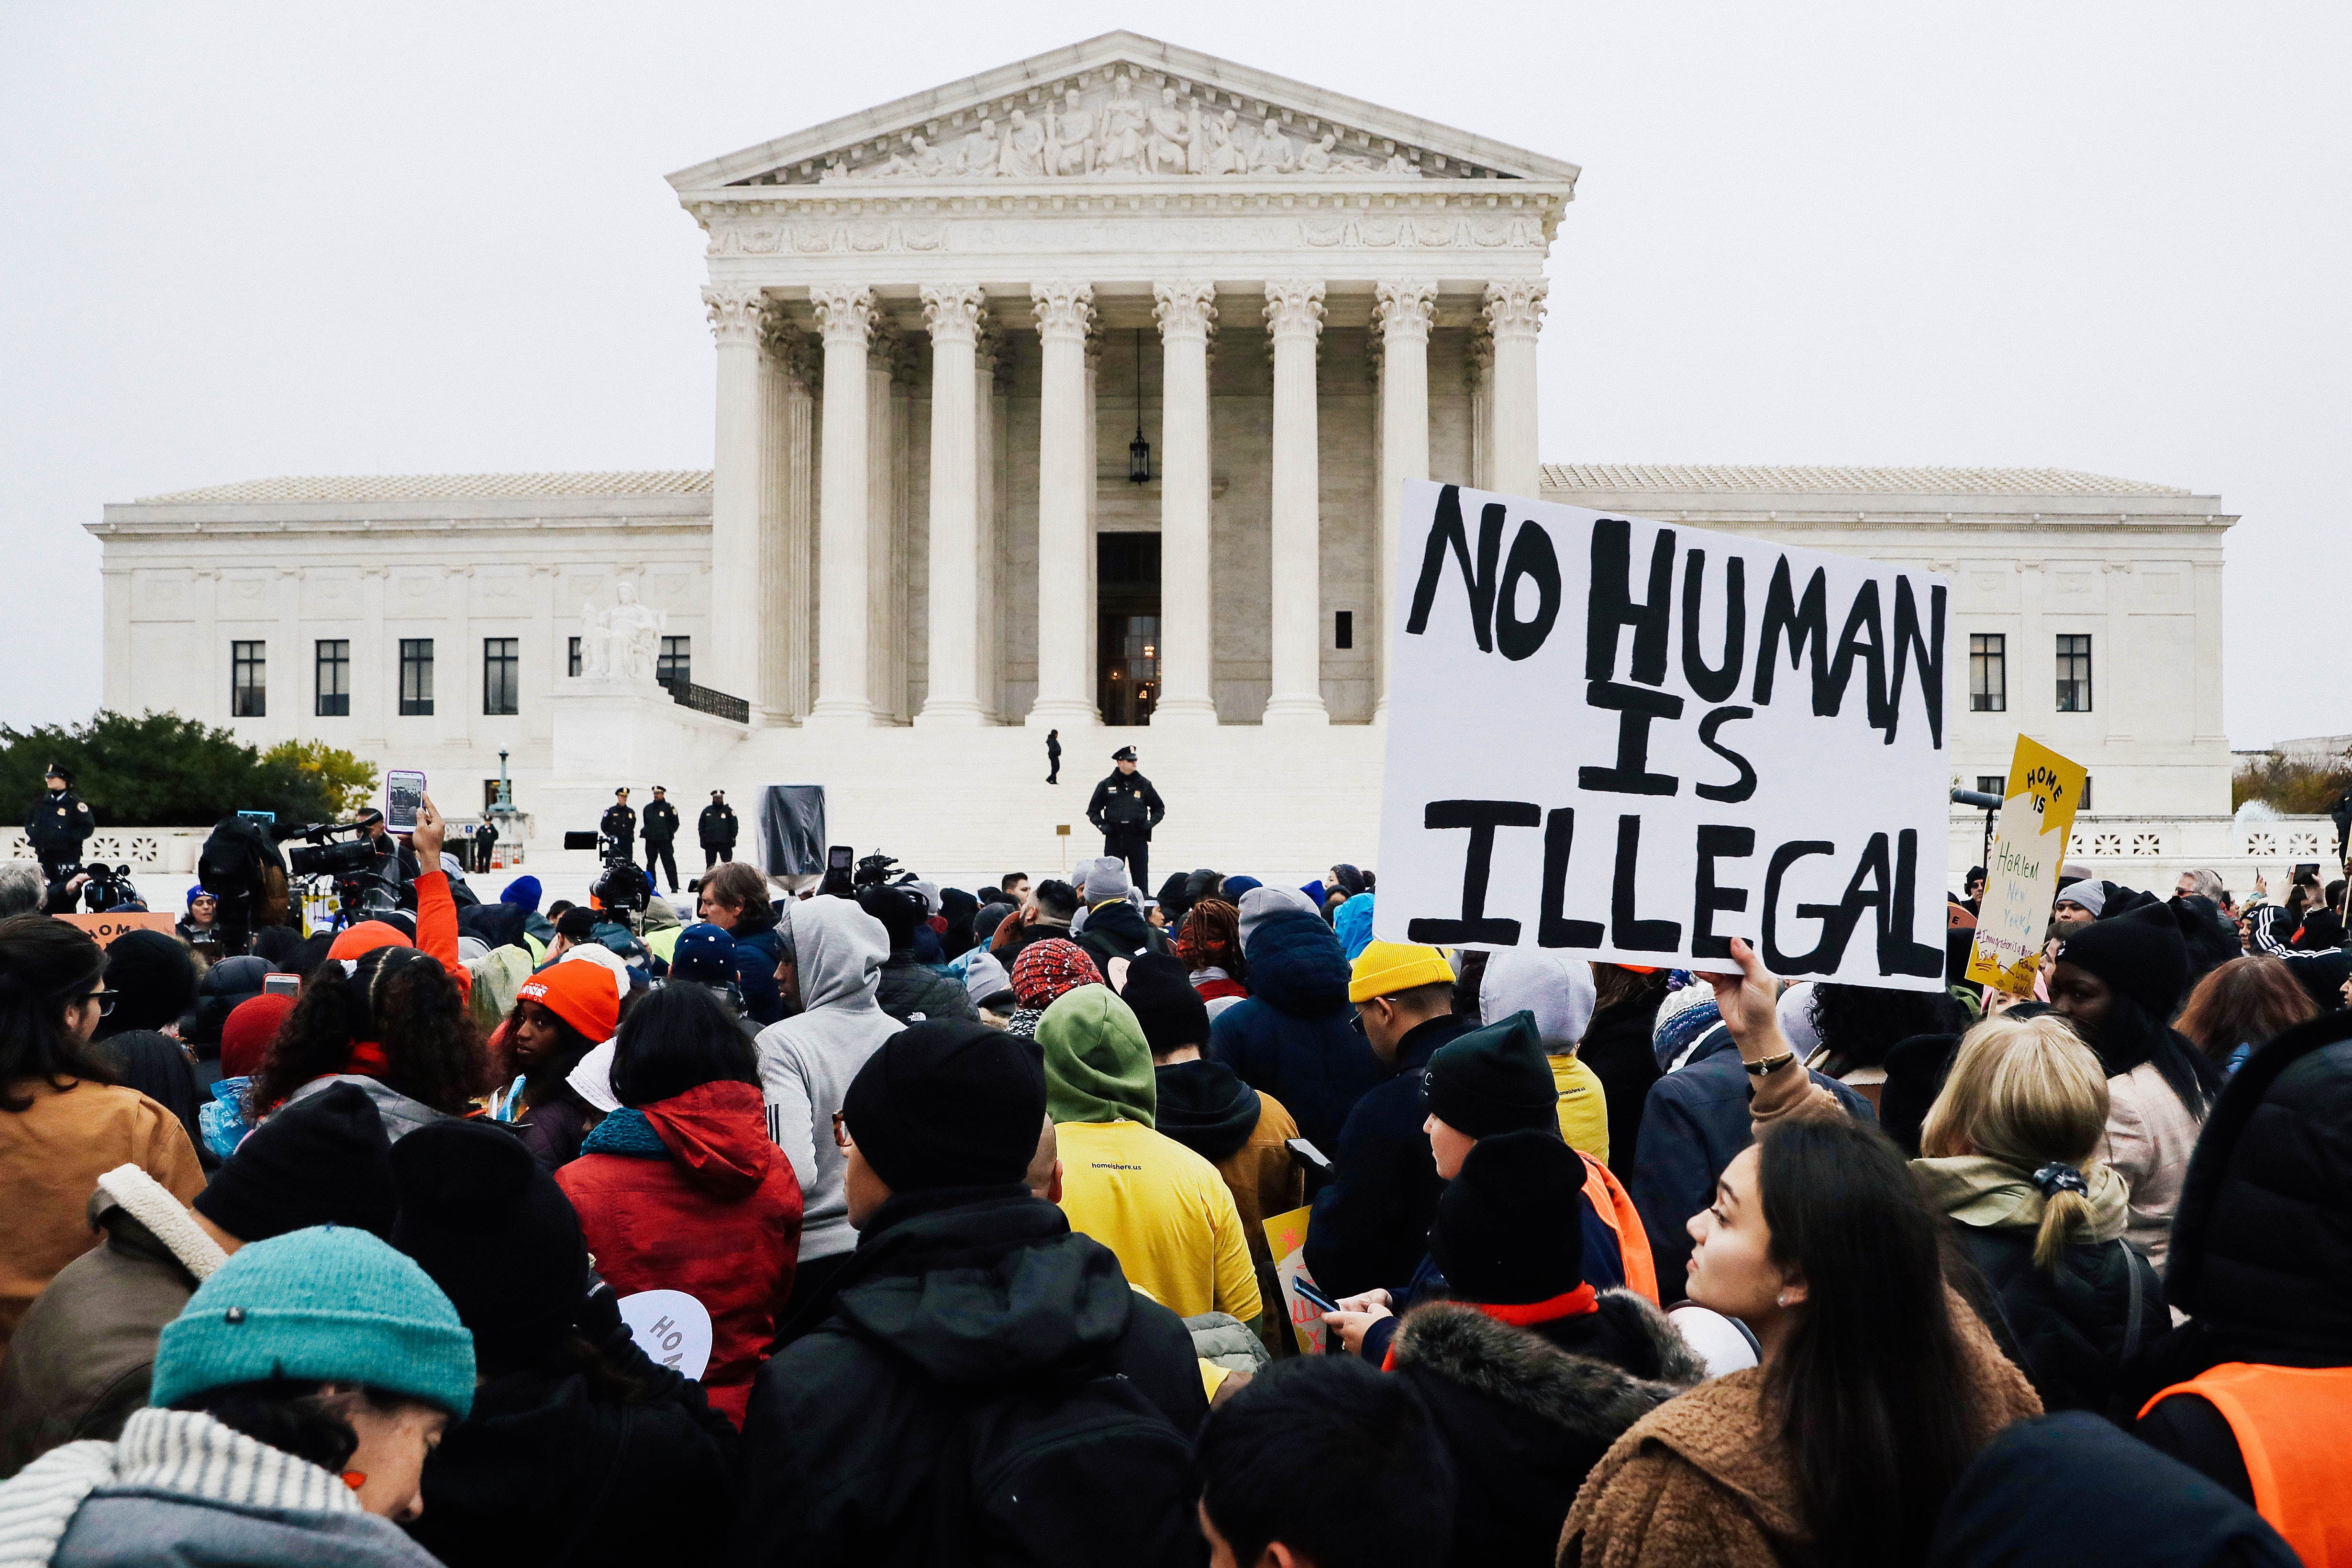 A crowd of demonstrators outside the Supreme Court. One poster reads "NO HUMAN IS ILLEGAL."